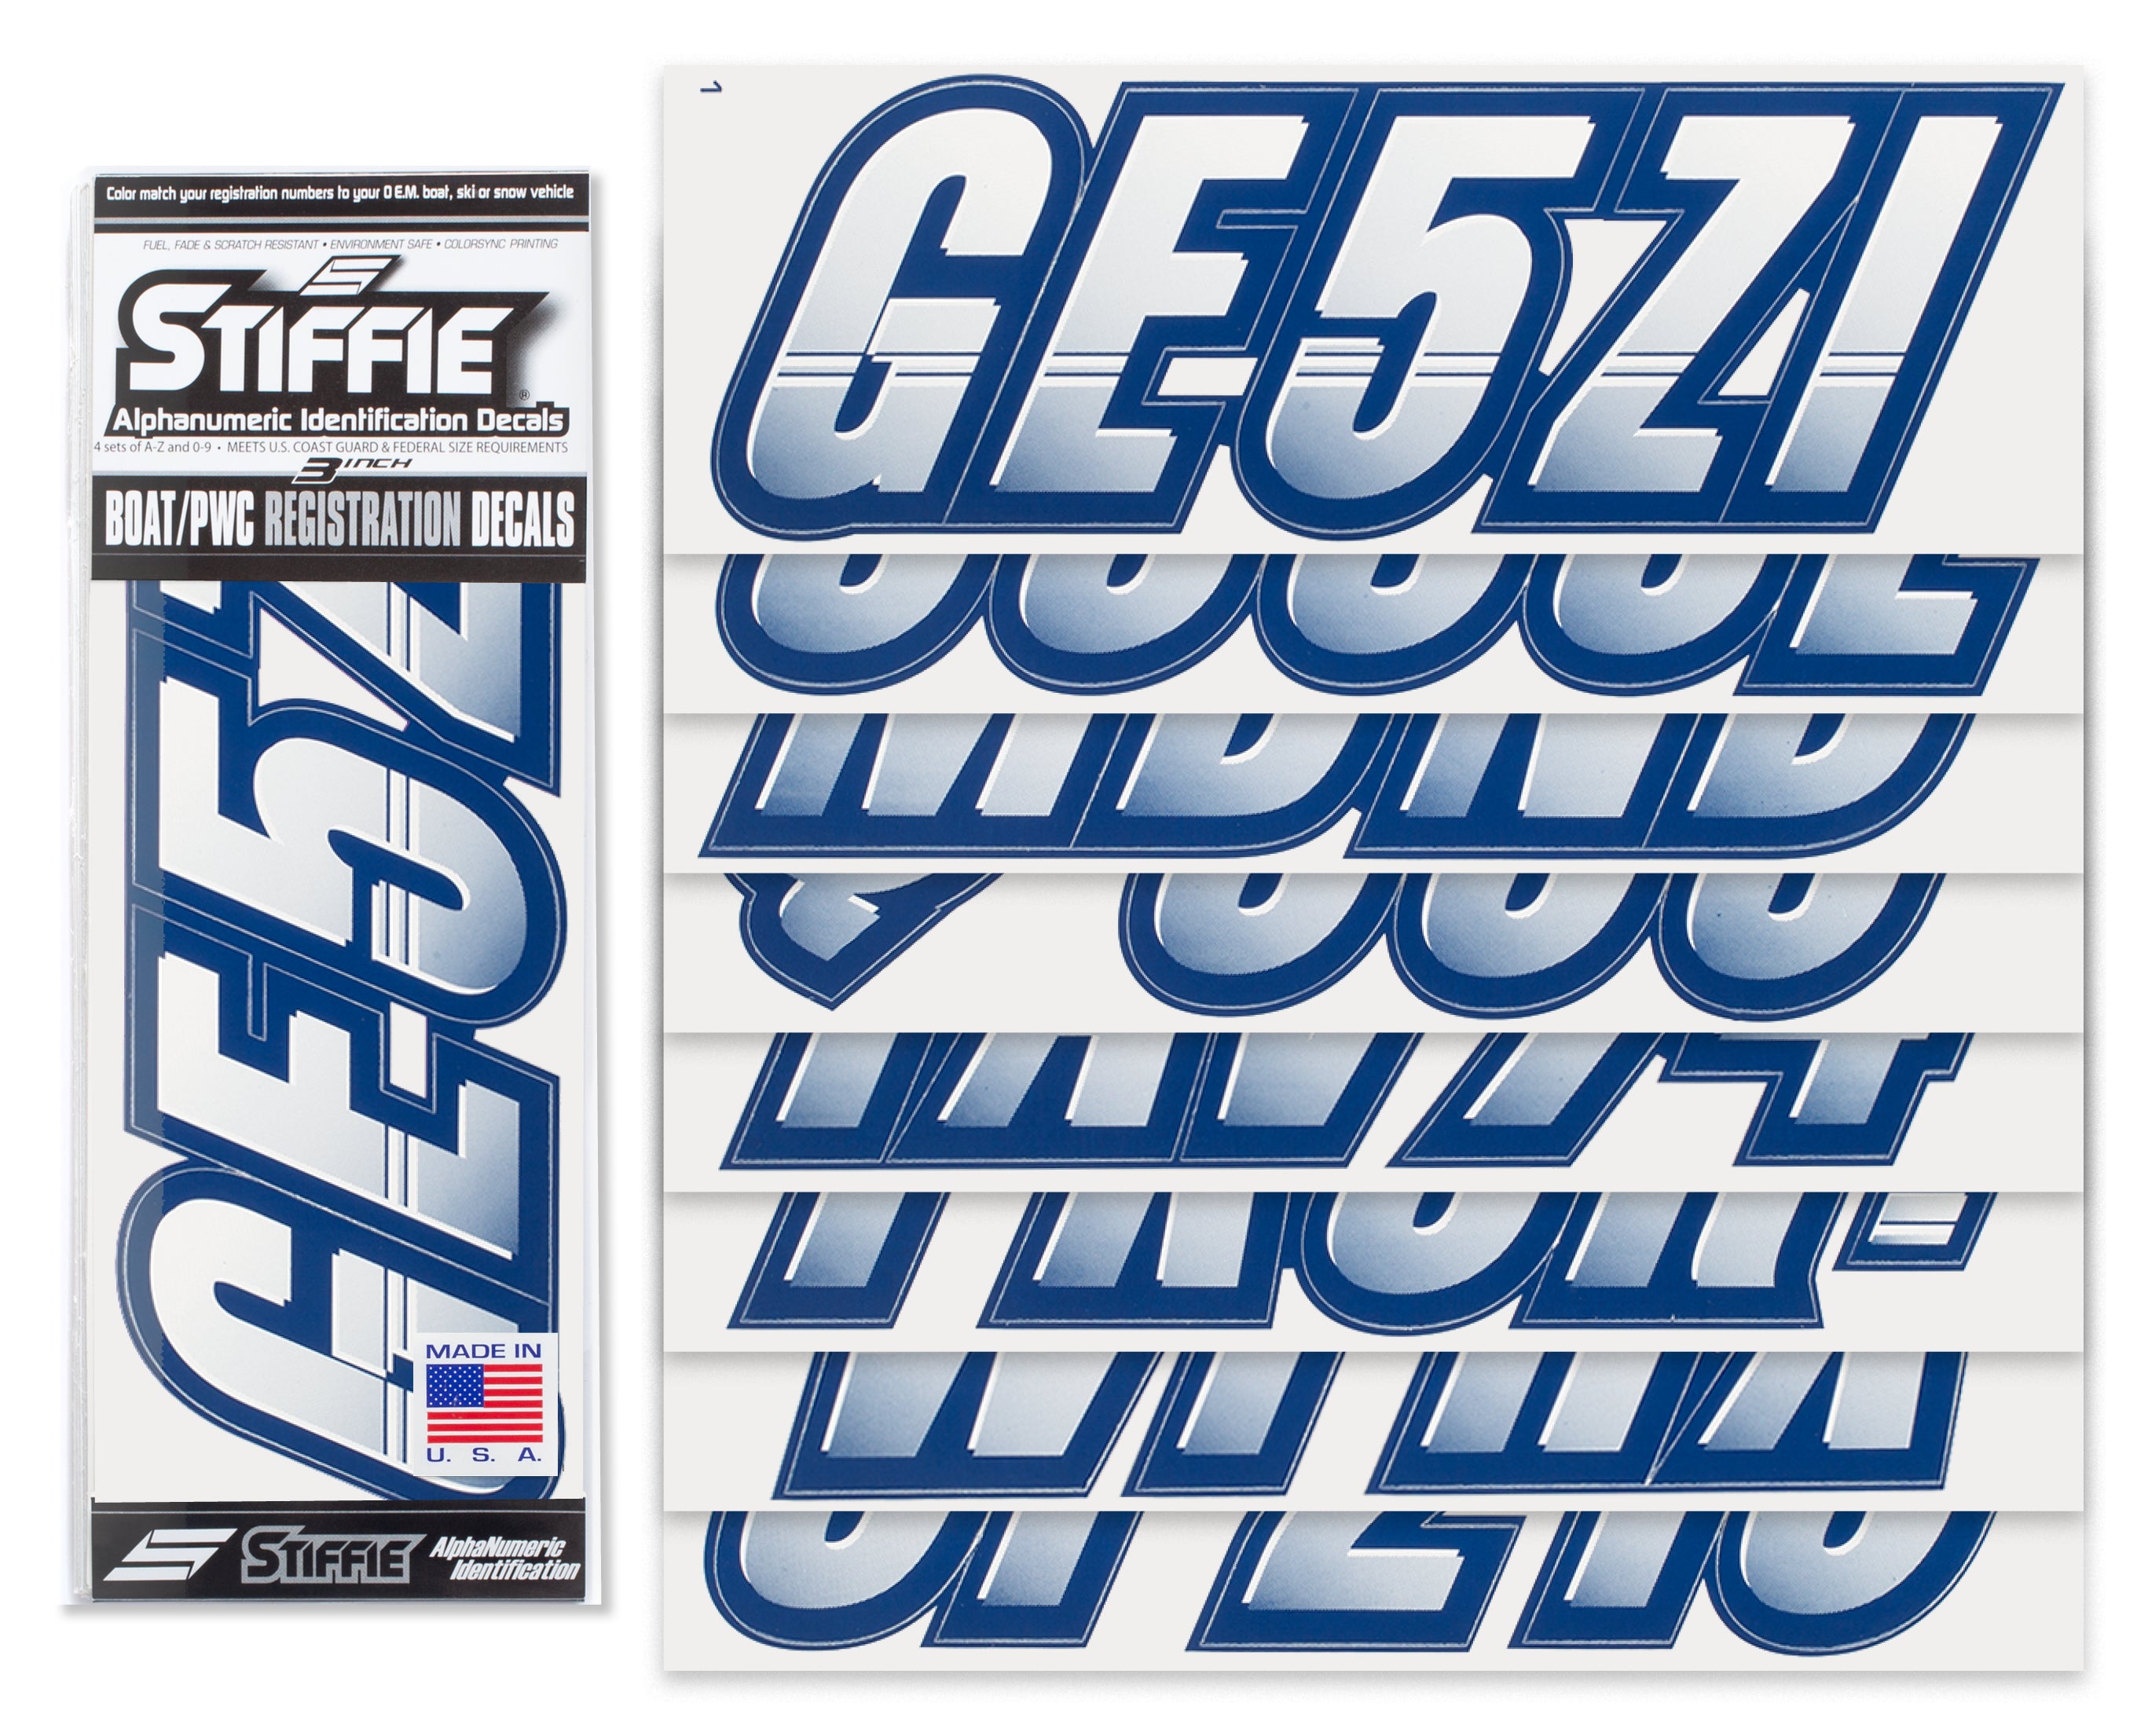 STIFFIE Techtron White/Navy 3" Alpha-Numeric Registration Identification Numbers Stickers Decals for Boats & Personal Watercraft